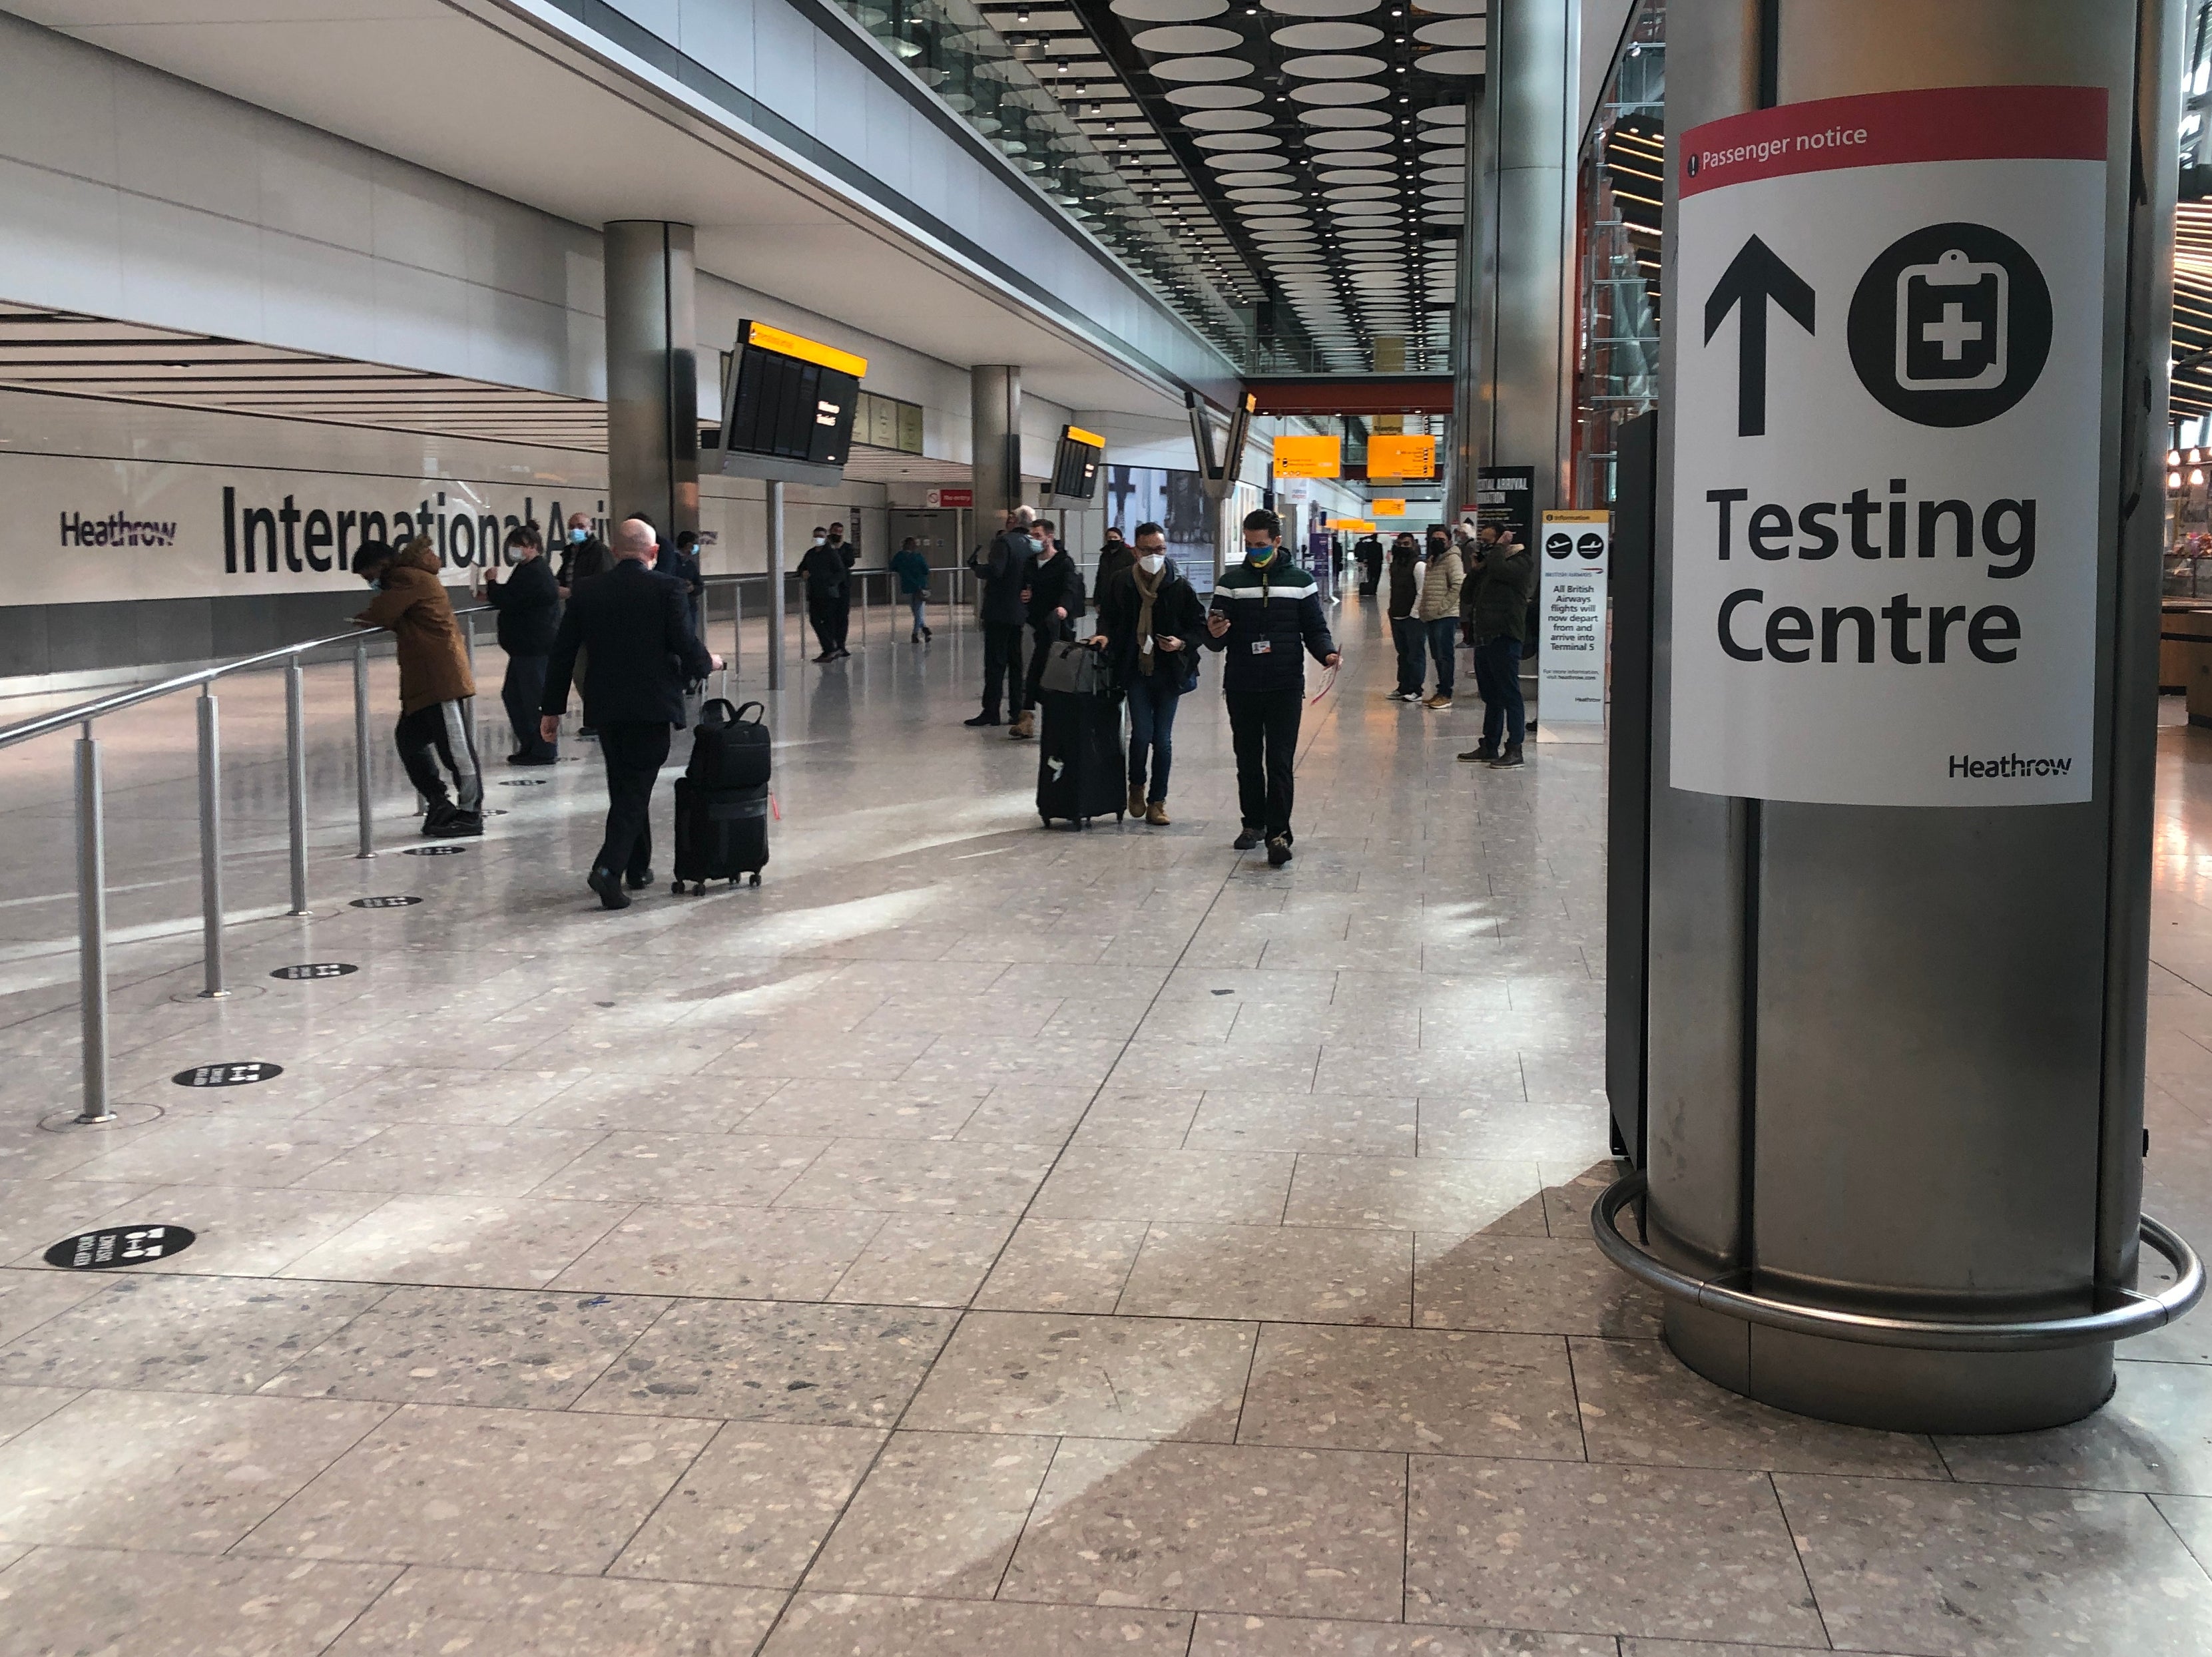 Away day: Heathrow arrivals remain well below half of pre-pandemic levels